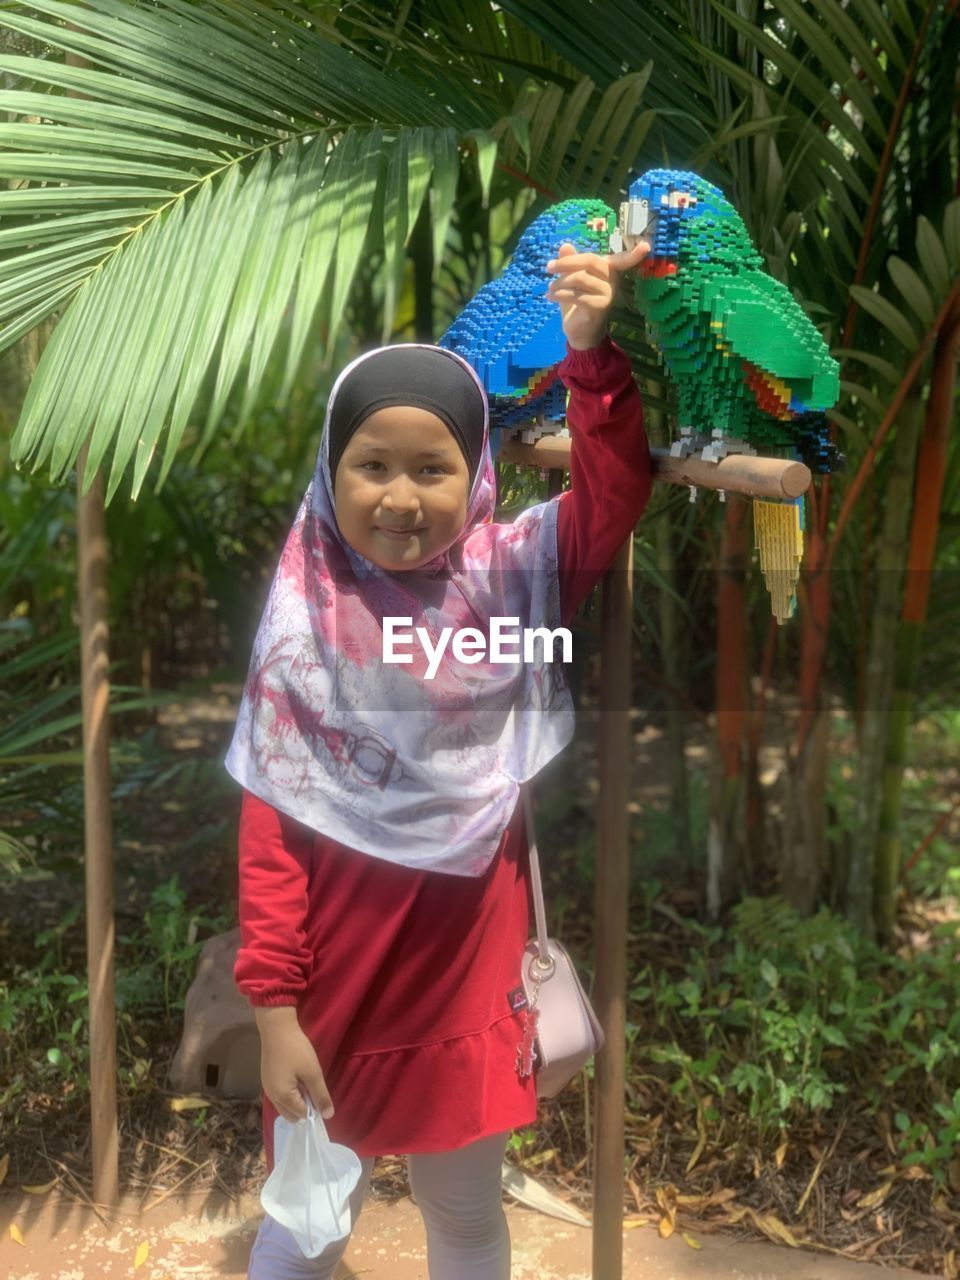 child, childhood, full length, female, women, nature, standing, smiling, tree, plant, clothing, day, men, front view, tropical climate, leisure activity, lifestyles, happiness, one person, looking at camera, portrait, person, adult, outdoors, palm tree, jungle, human face, emotion, holding, casual clothing, traditional clothing, agriculture